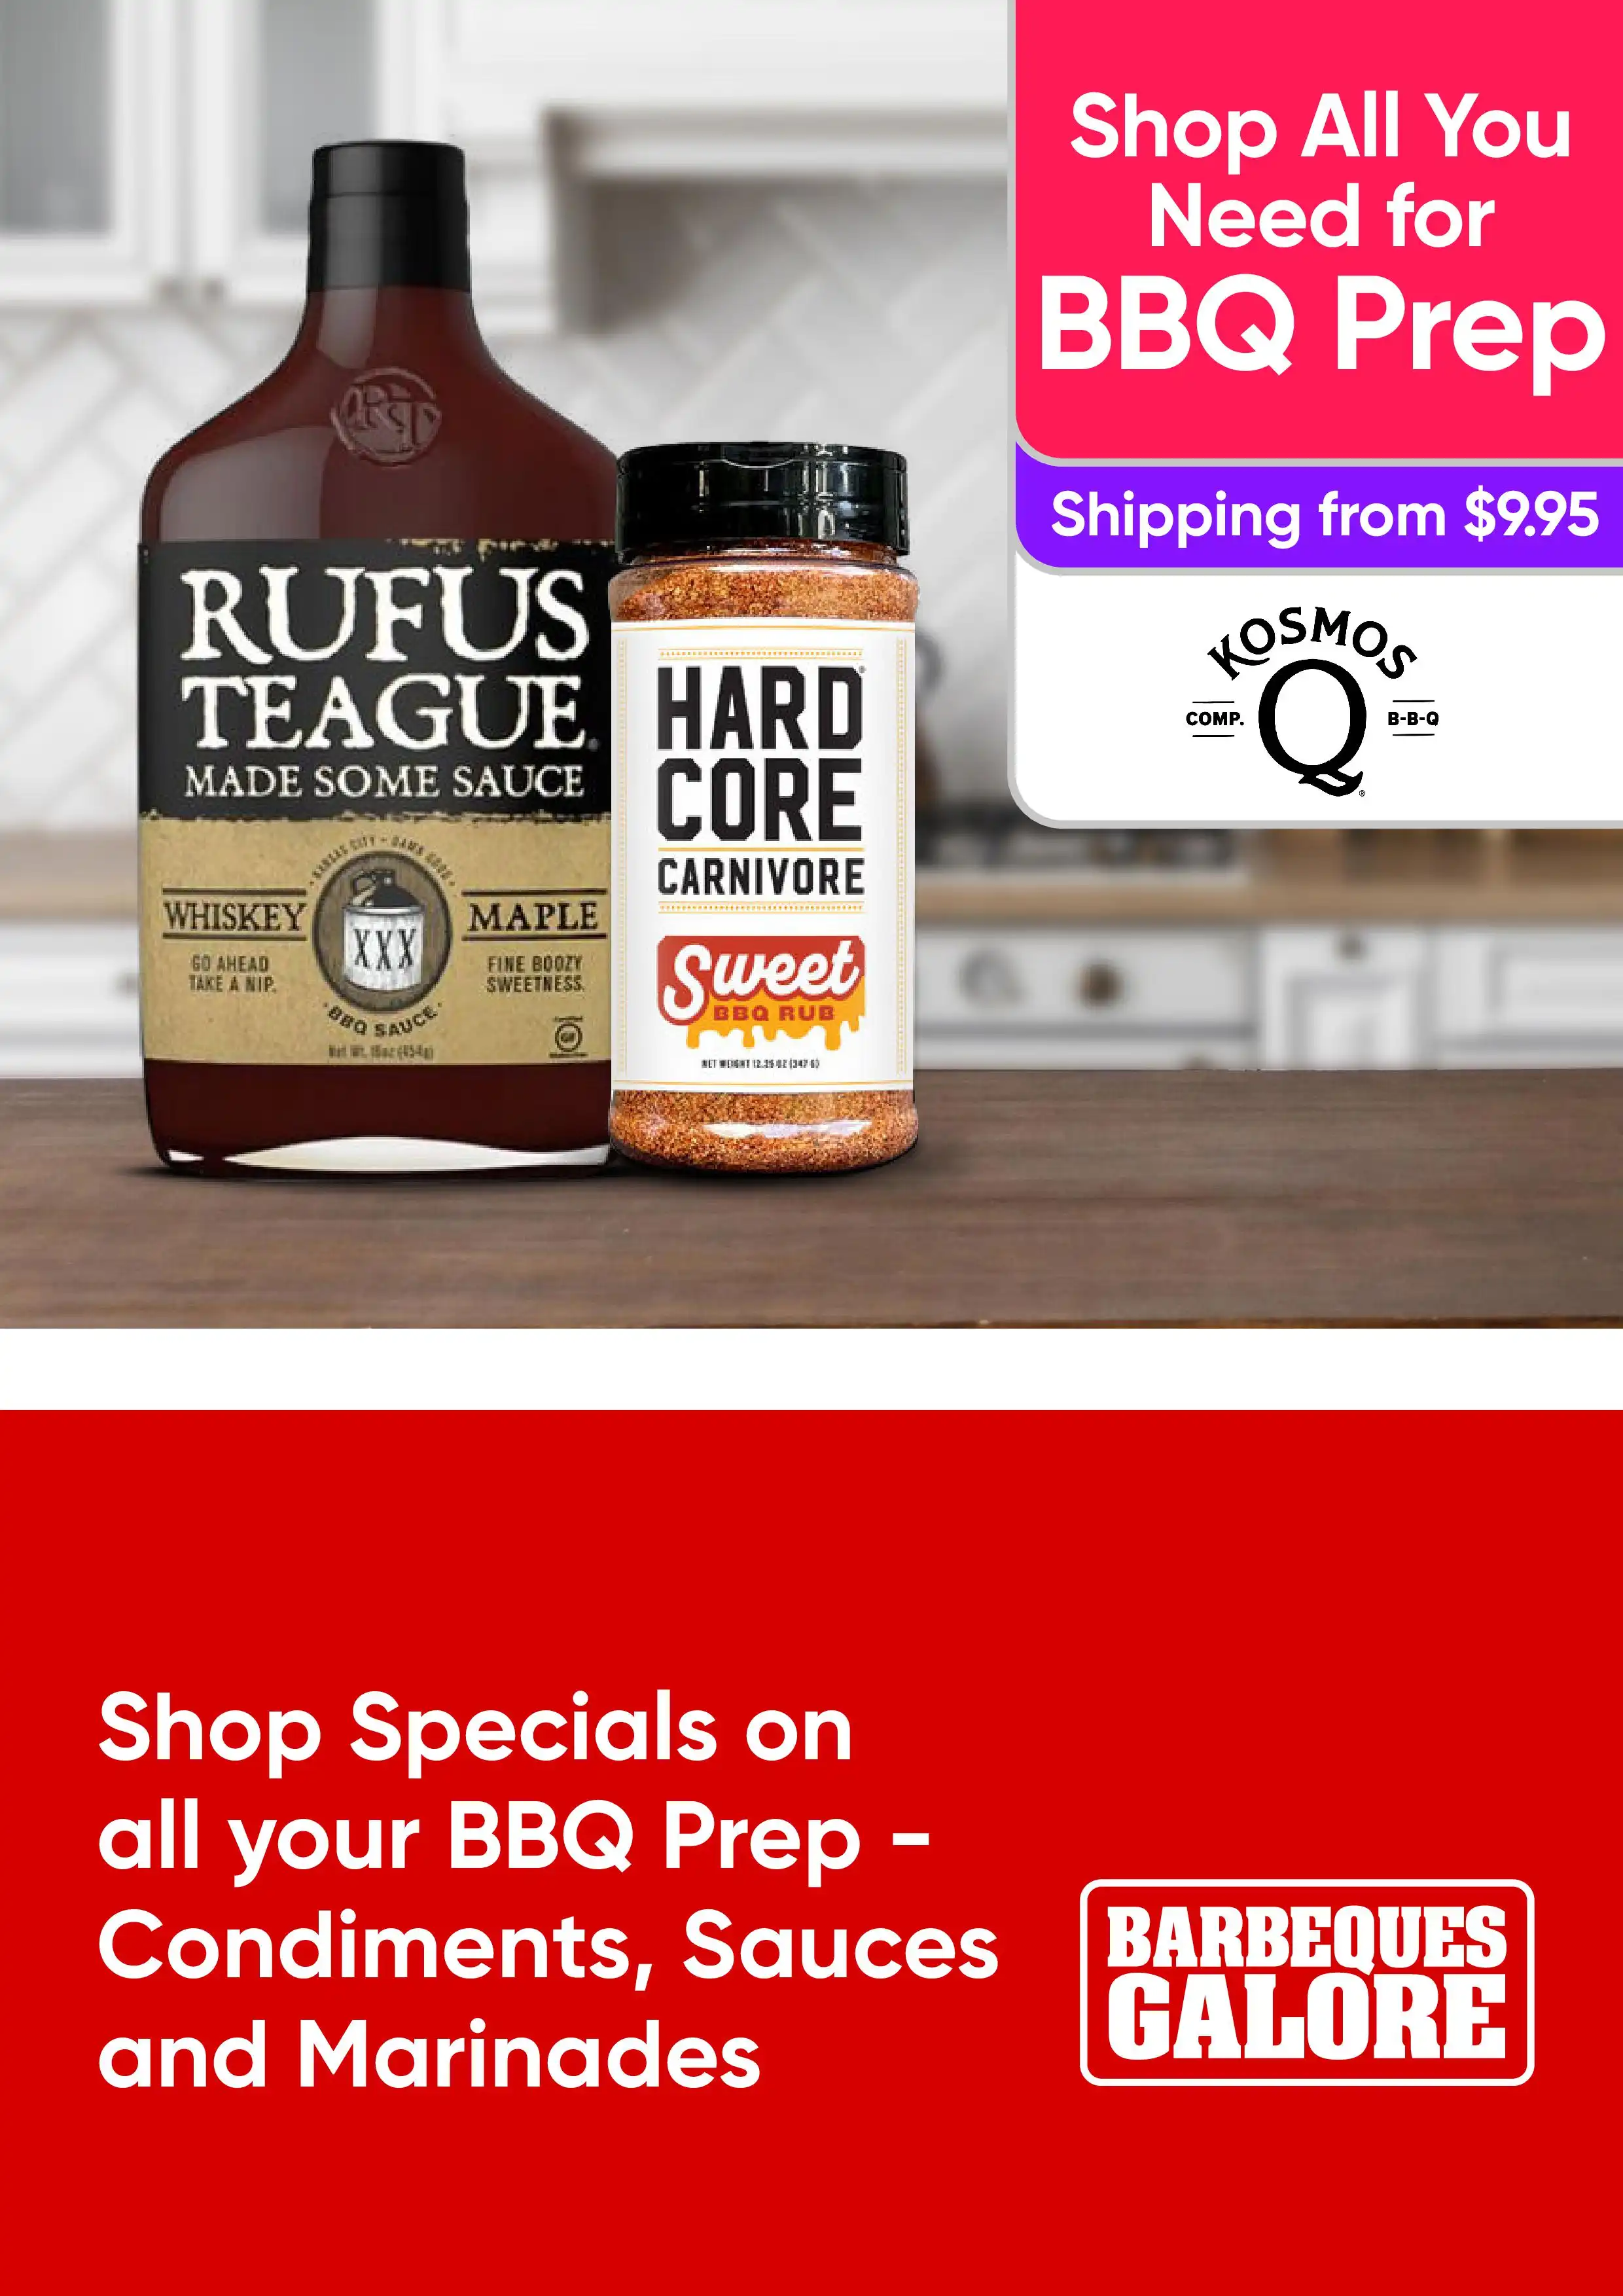 Shop Specials on all your BBQ Prep - Condiments, Sauces and Marinades